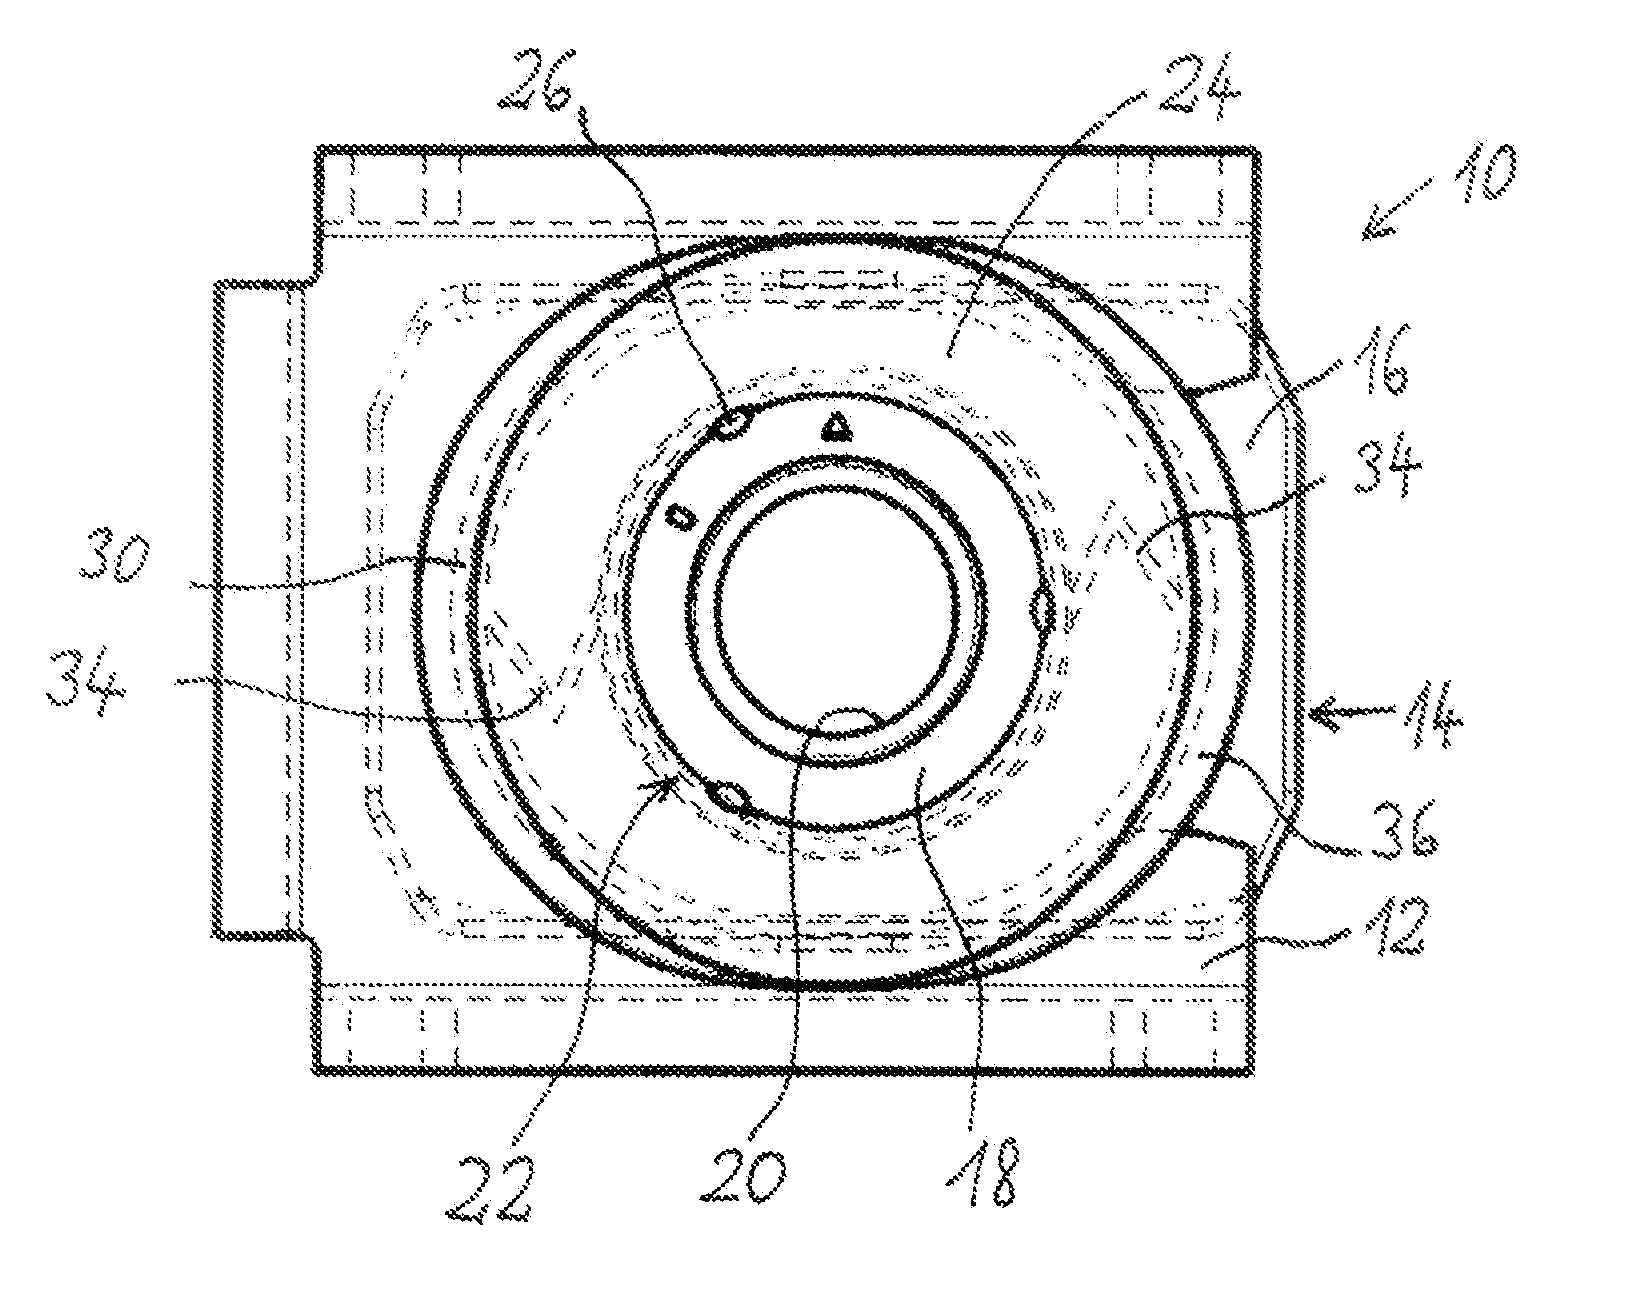 Self-centring cage nut